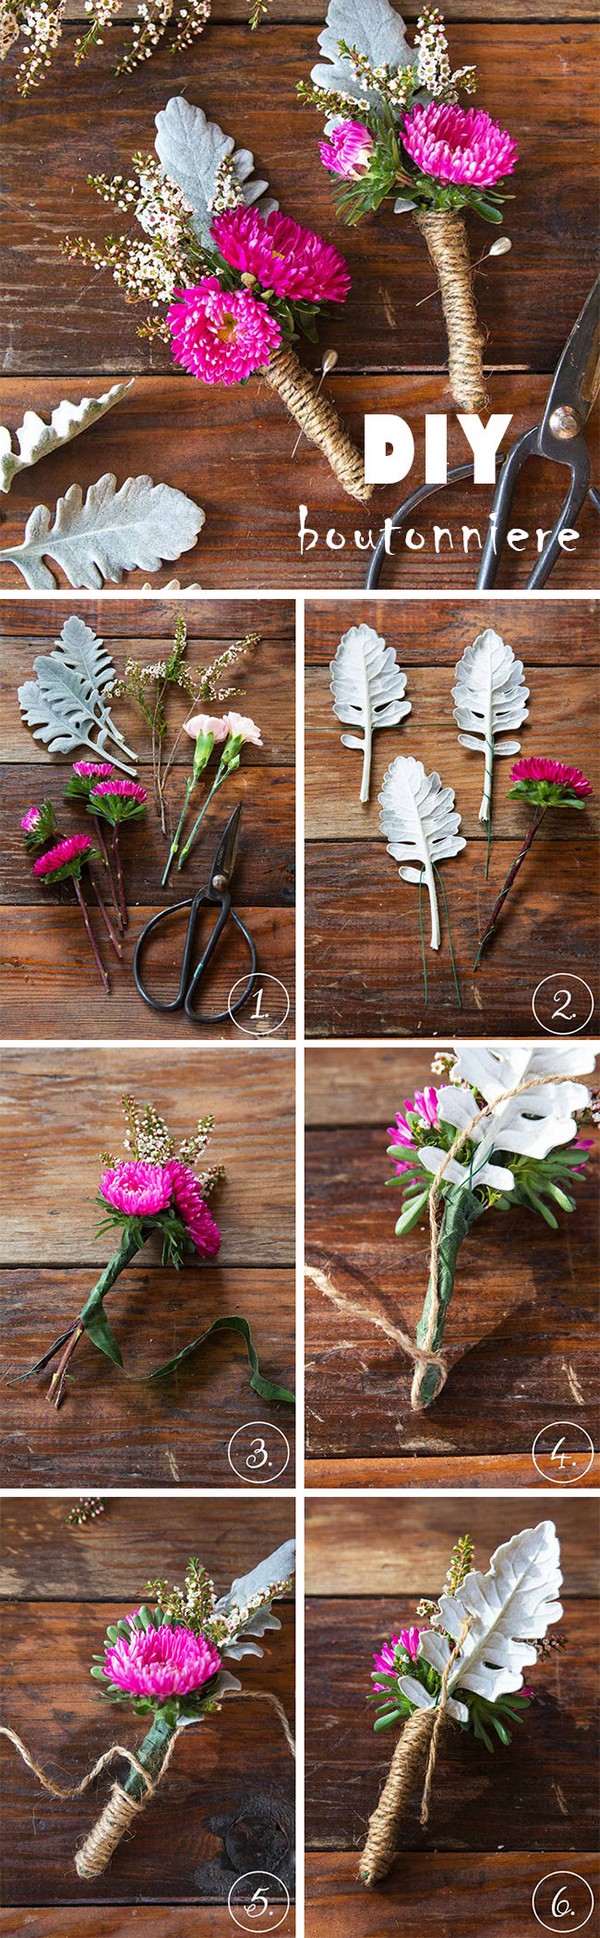 DIY Boutonniere for Your Groom and Grooms Men